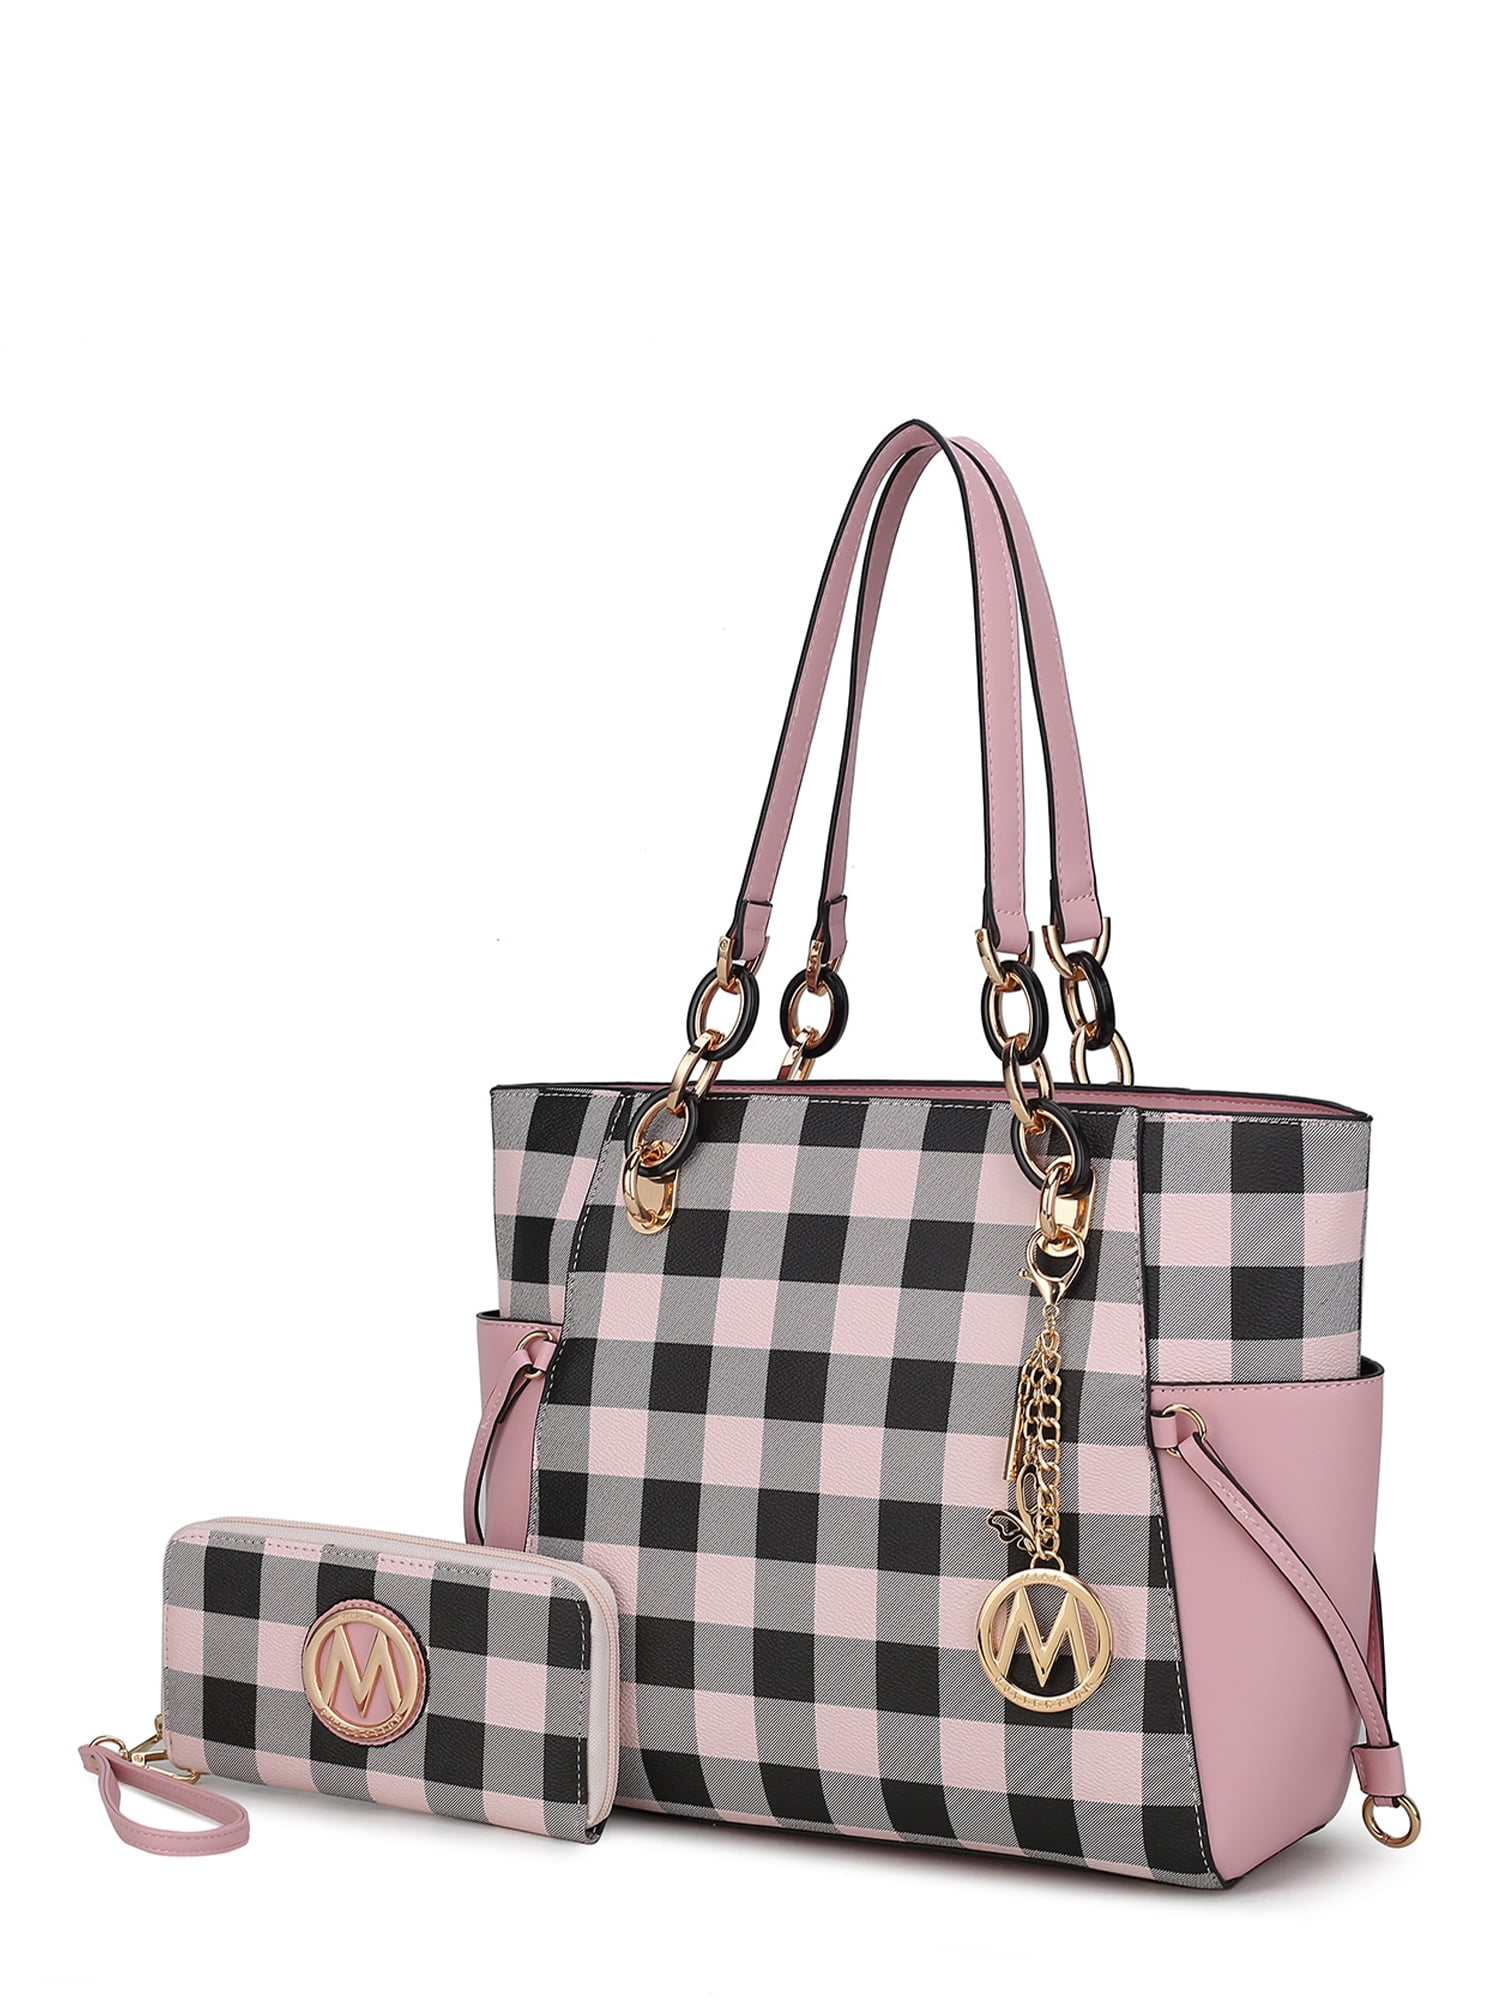 MKF Collection Yale Checkered Tote Handbag with Wallet by Mia K